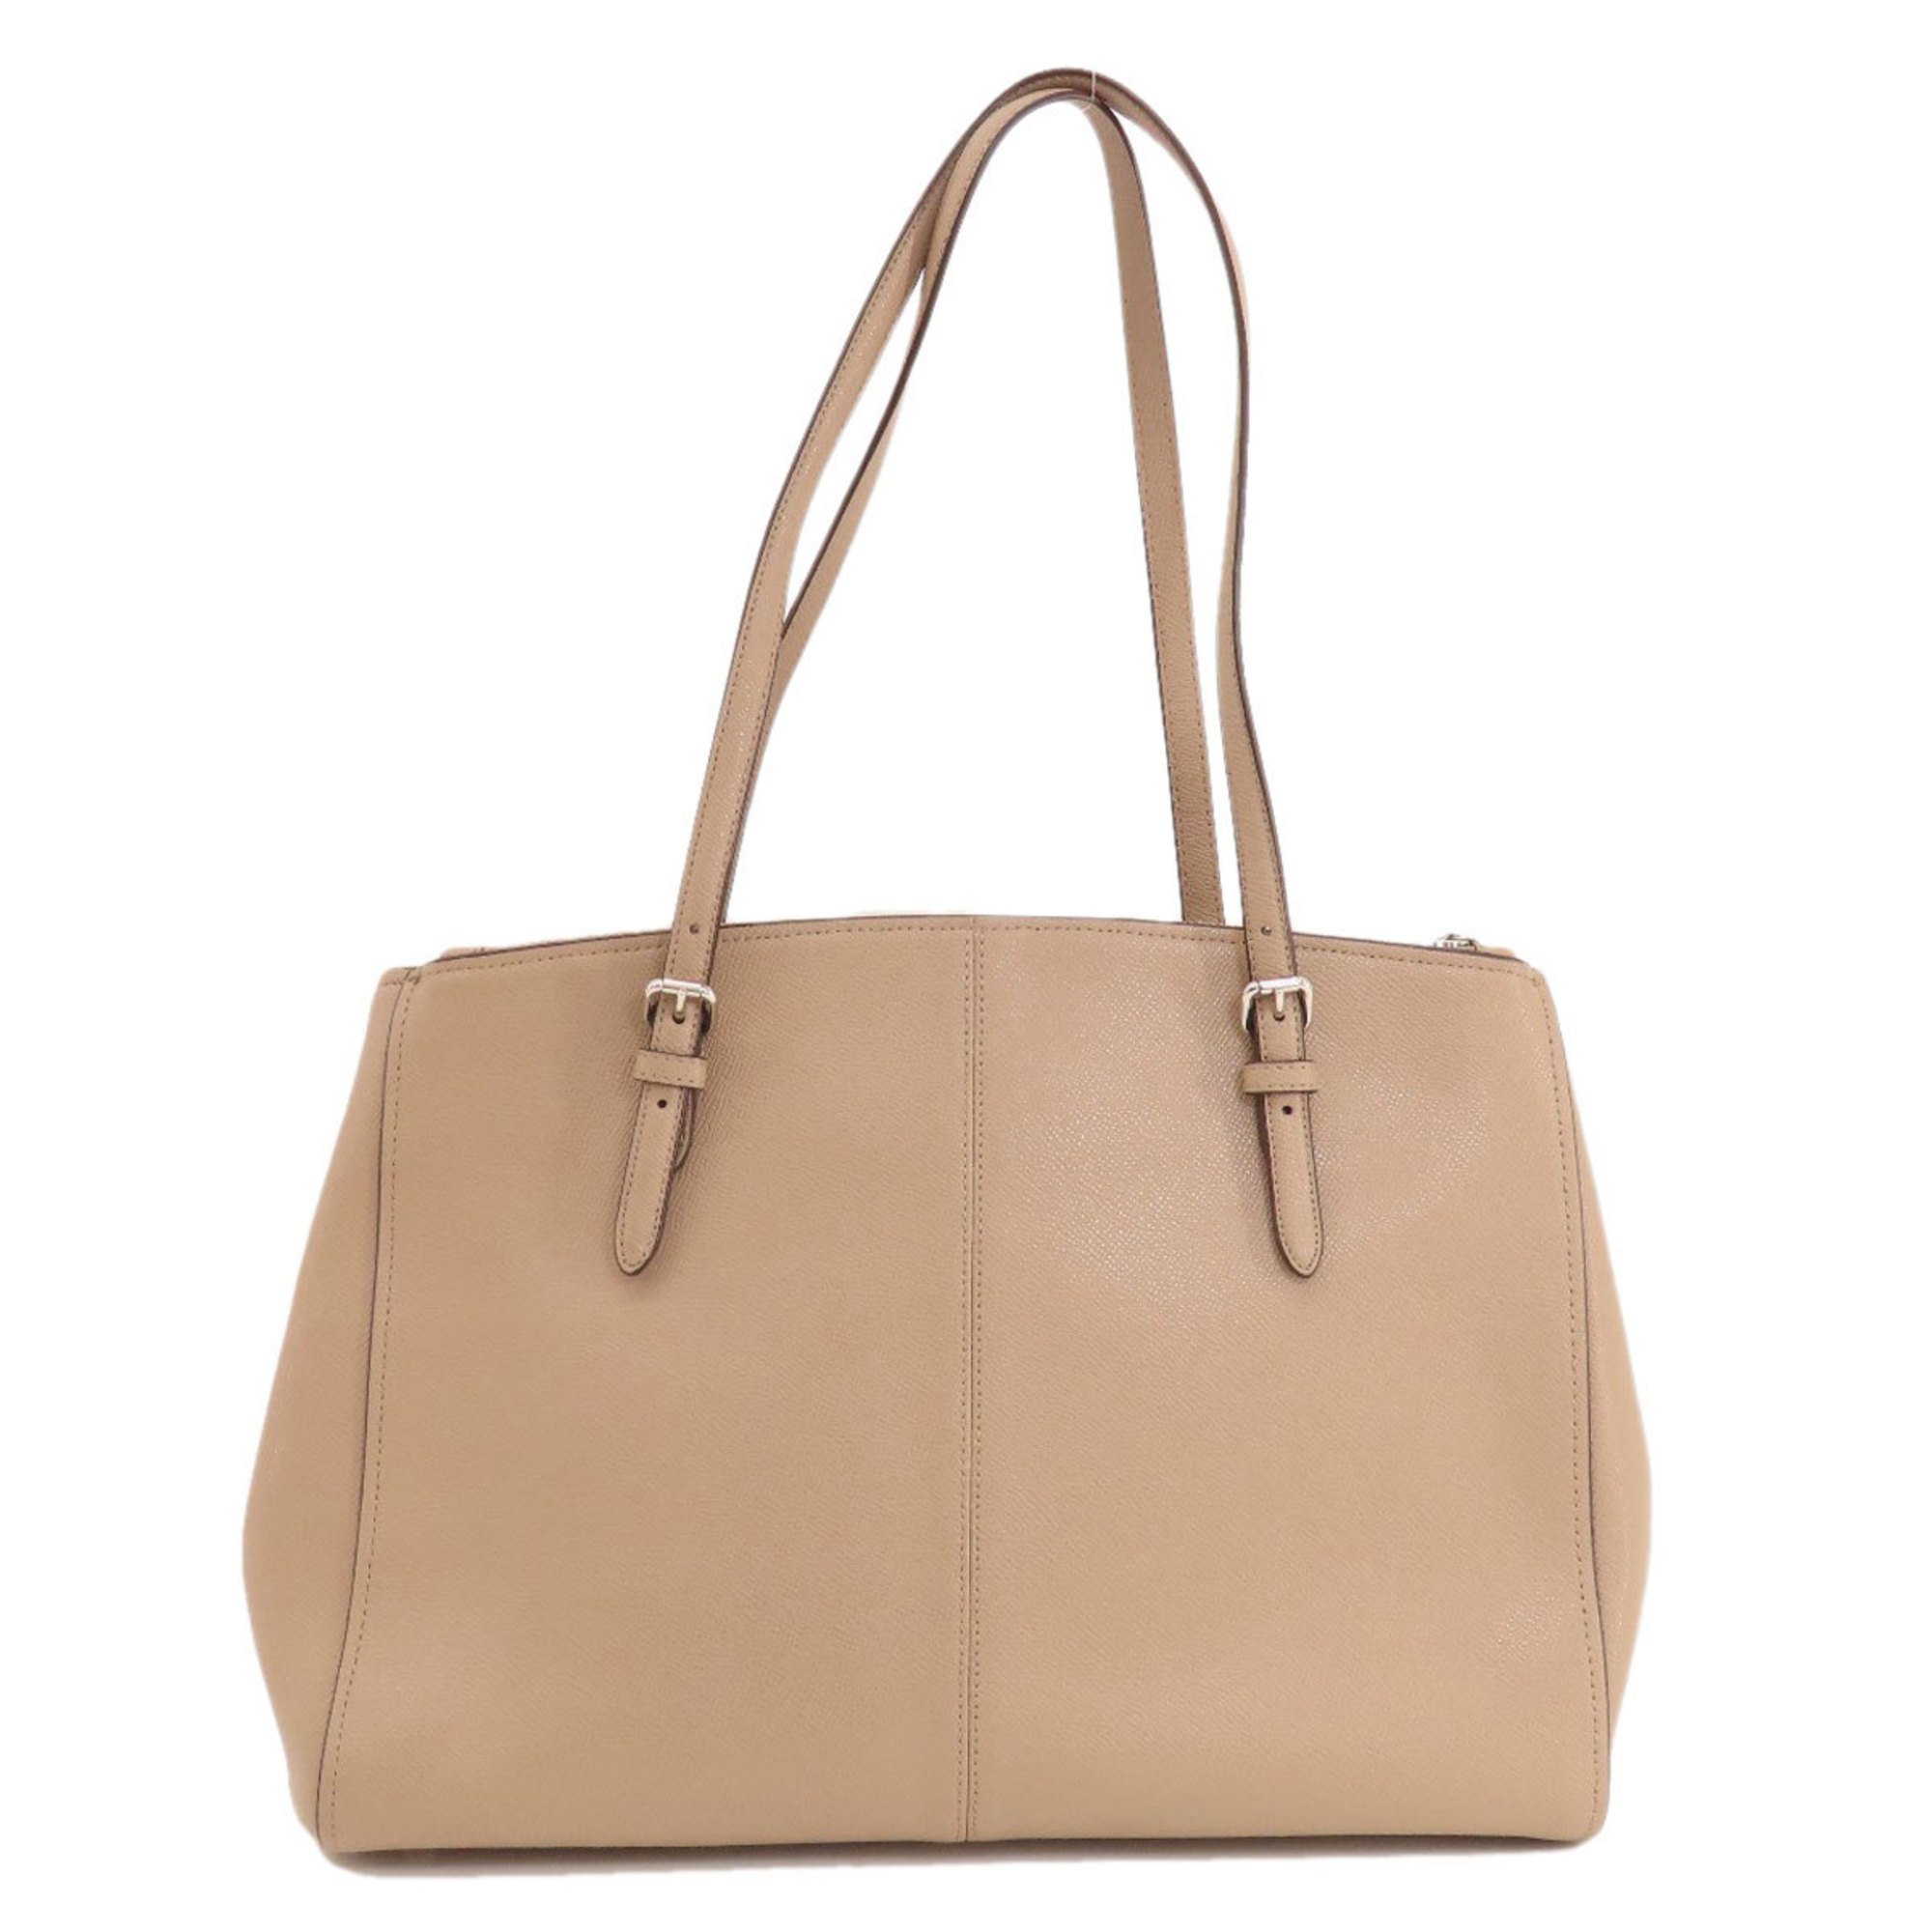 Coach 37776 Tote Bag Leather Women's